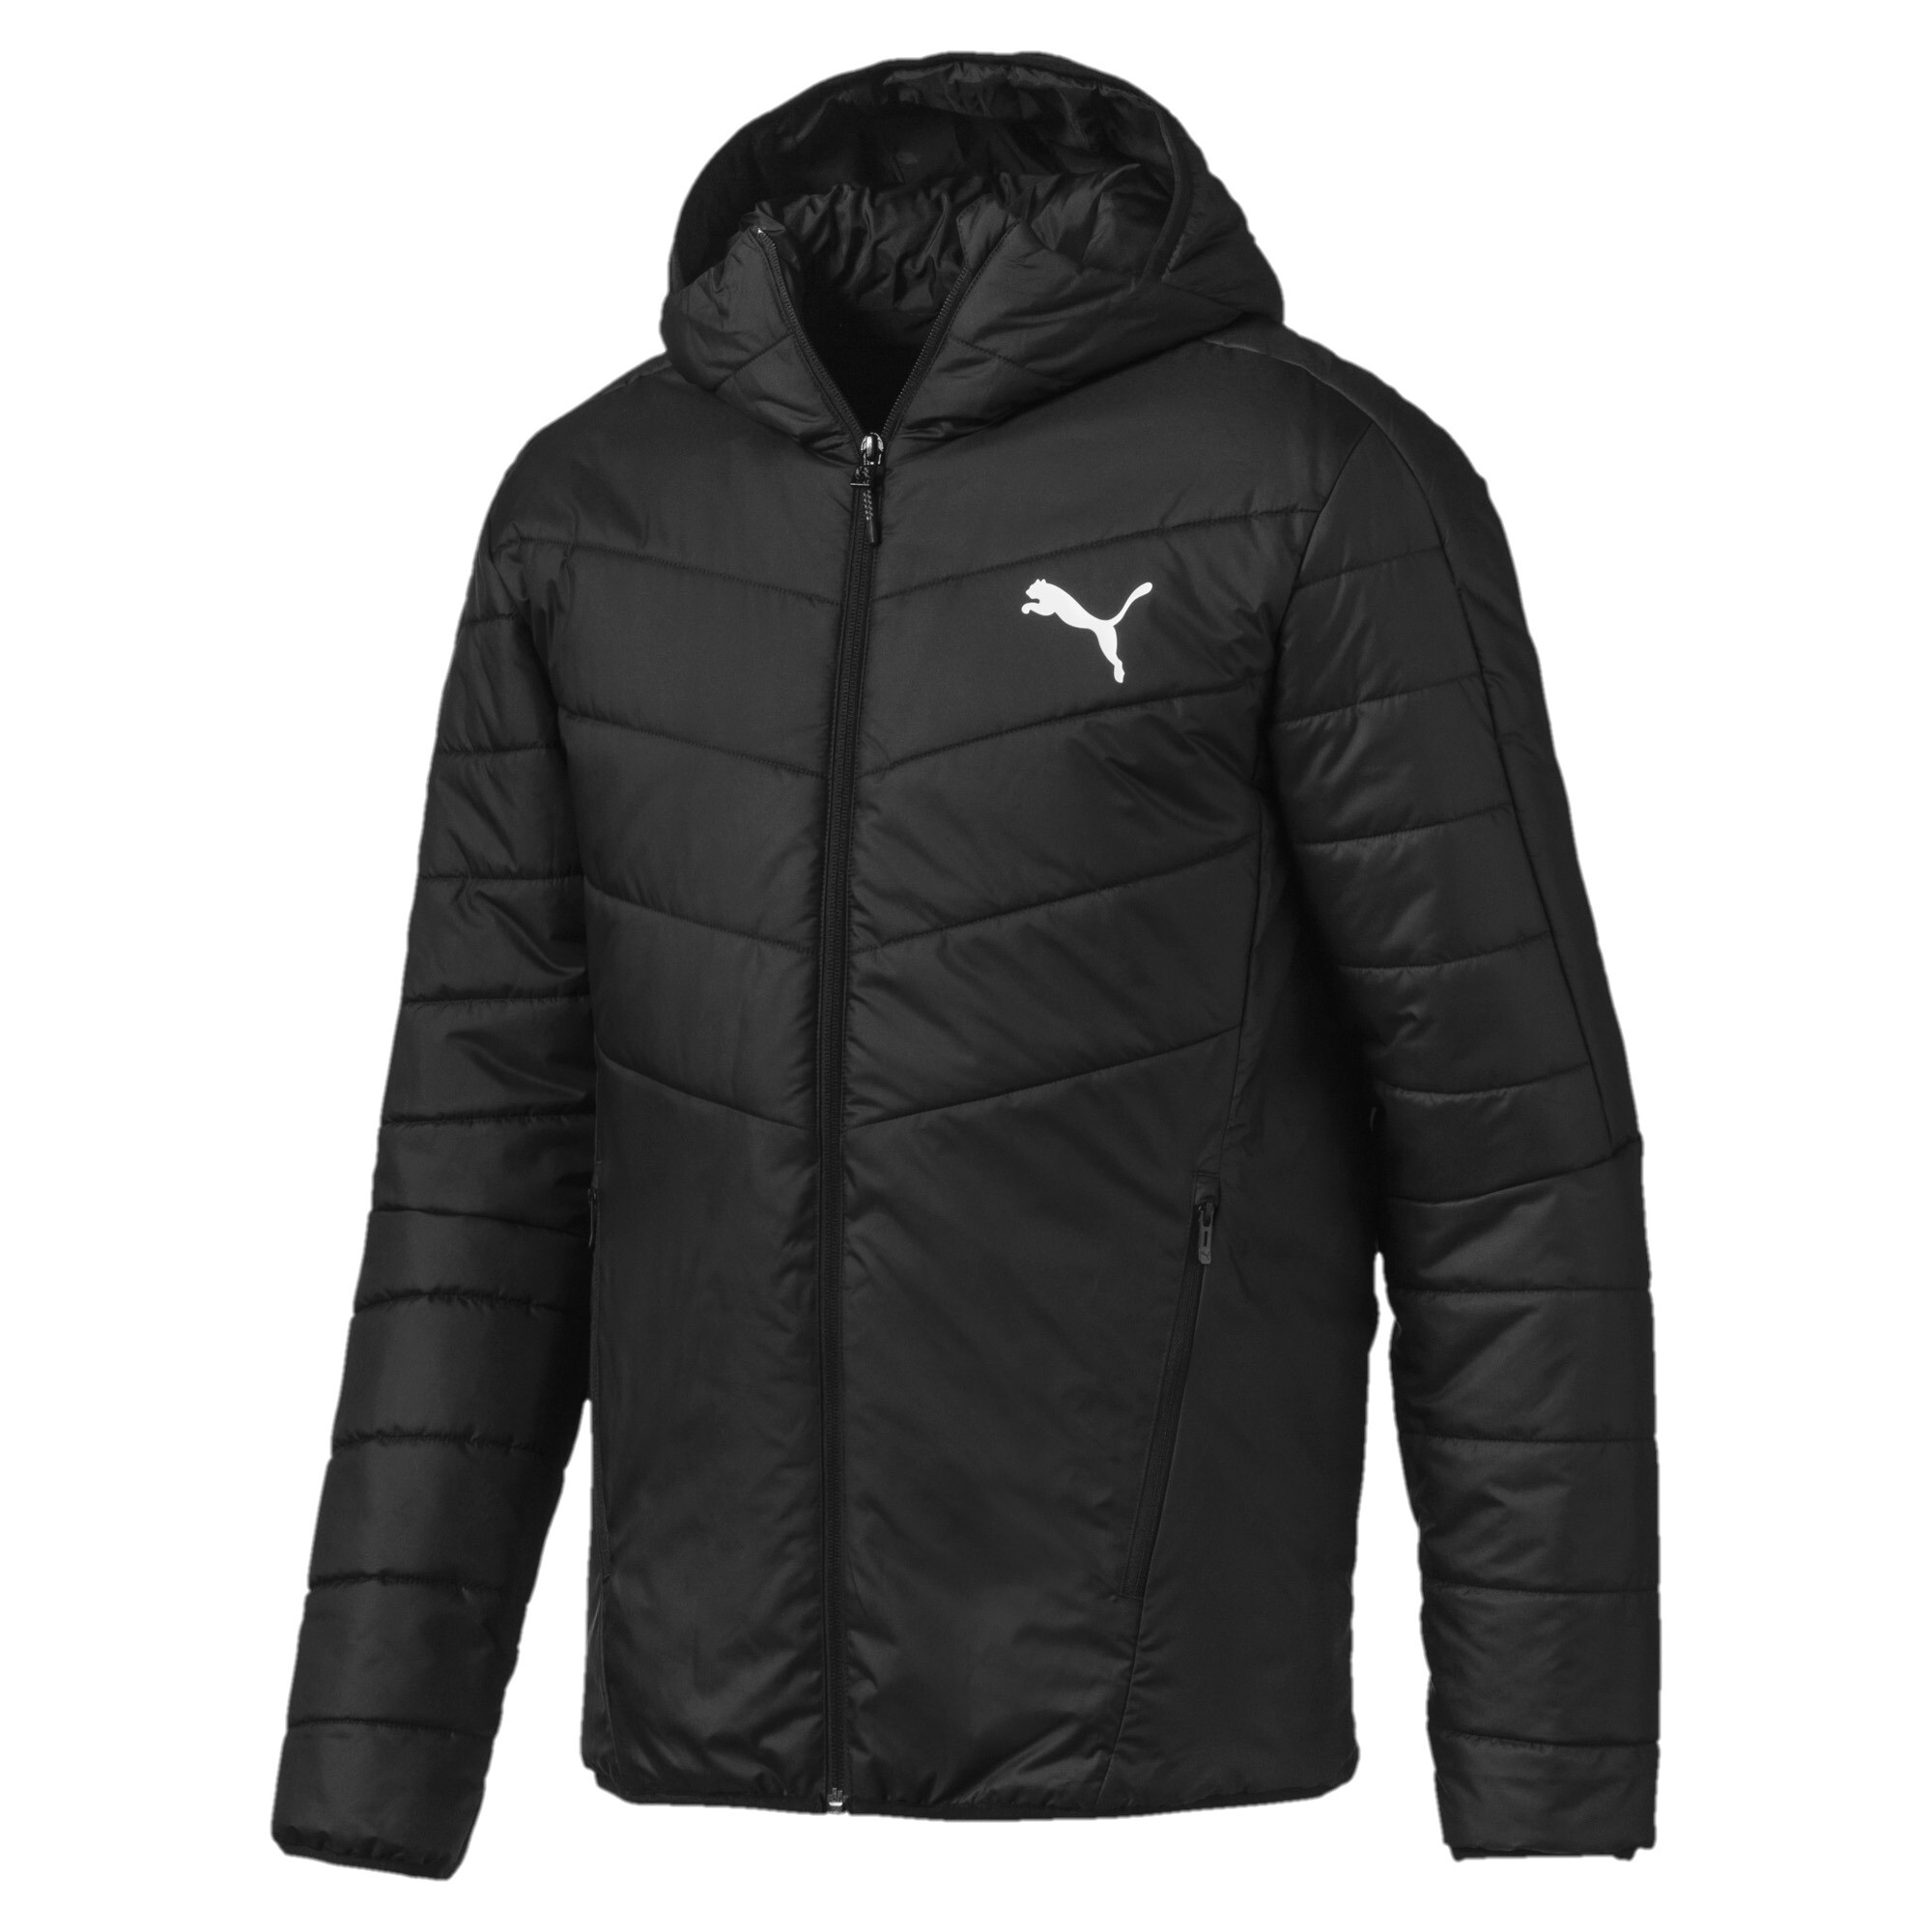 Men's Jackets and Outerwear - PUMA